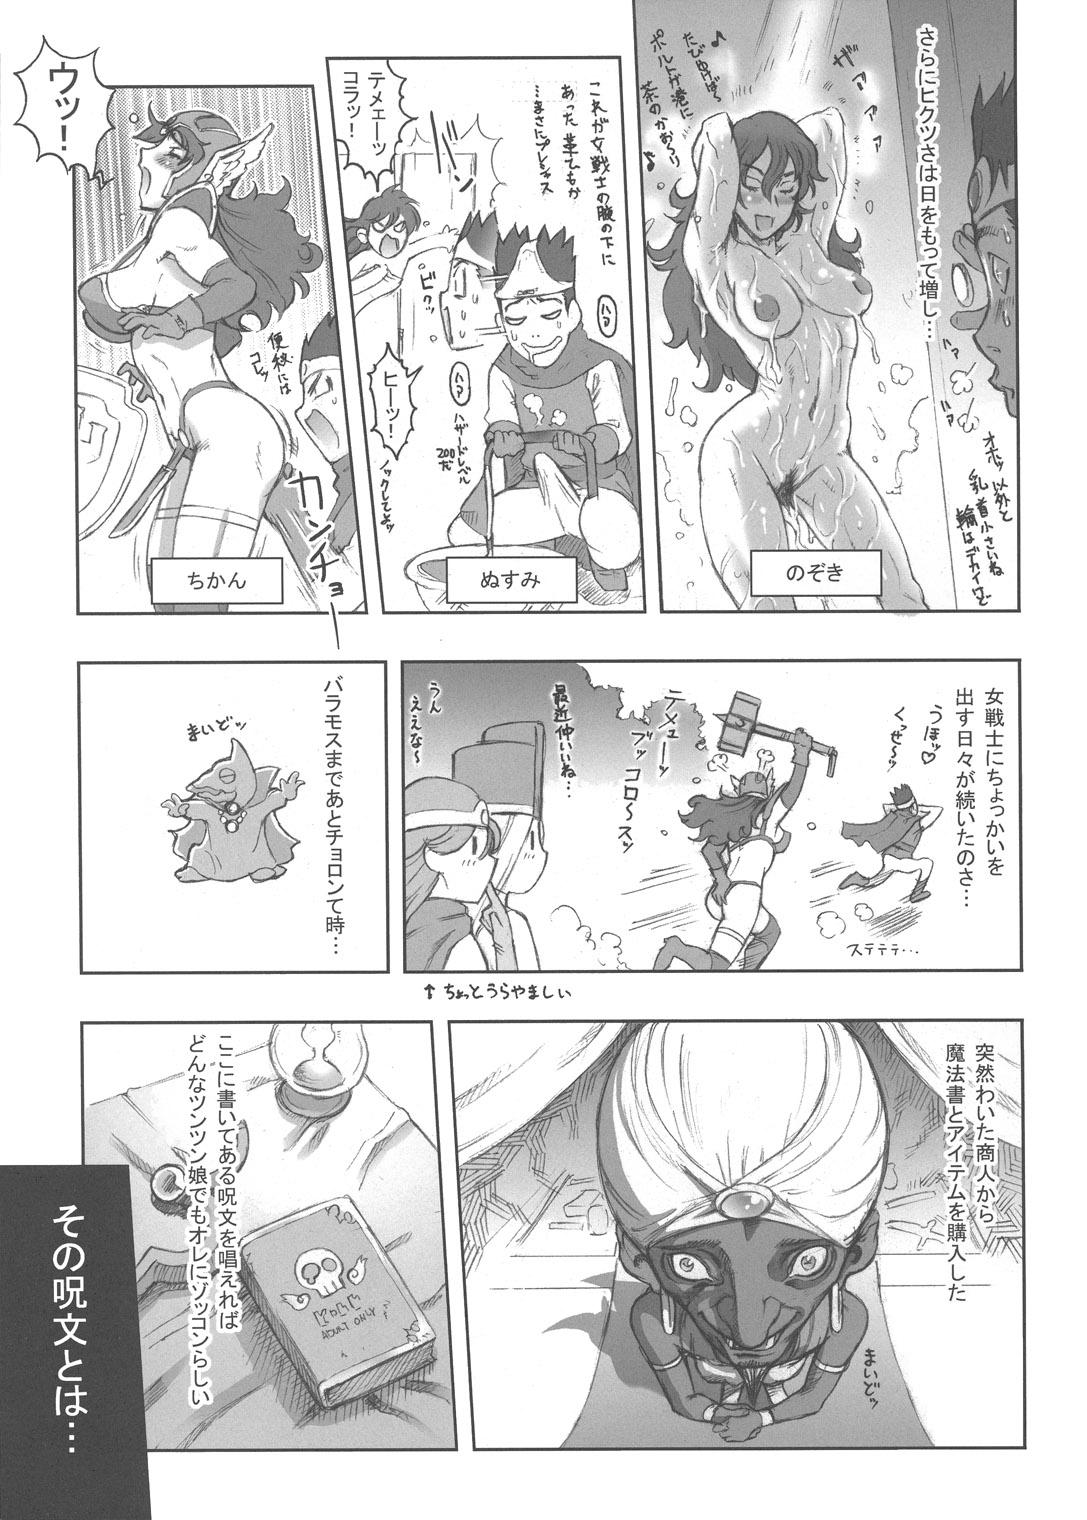 Free Fuck Nippon Onna Heroine 3 - Sailor moon Dragon quest iii Uncensored - Page 6